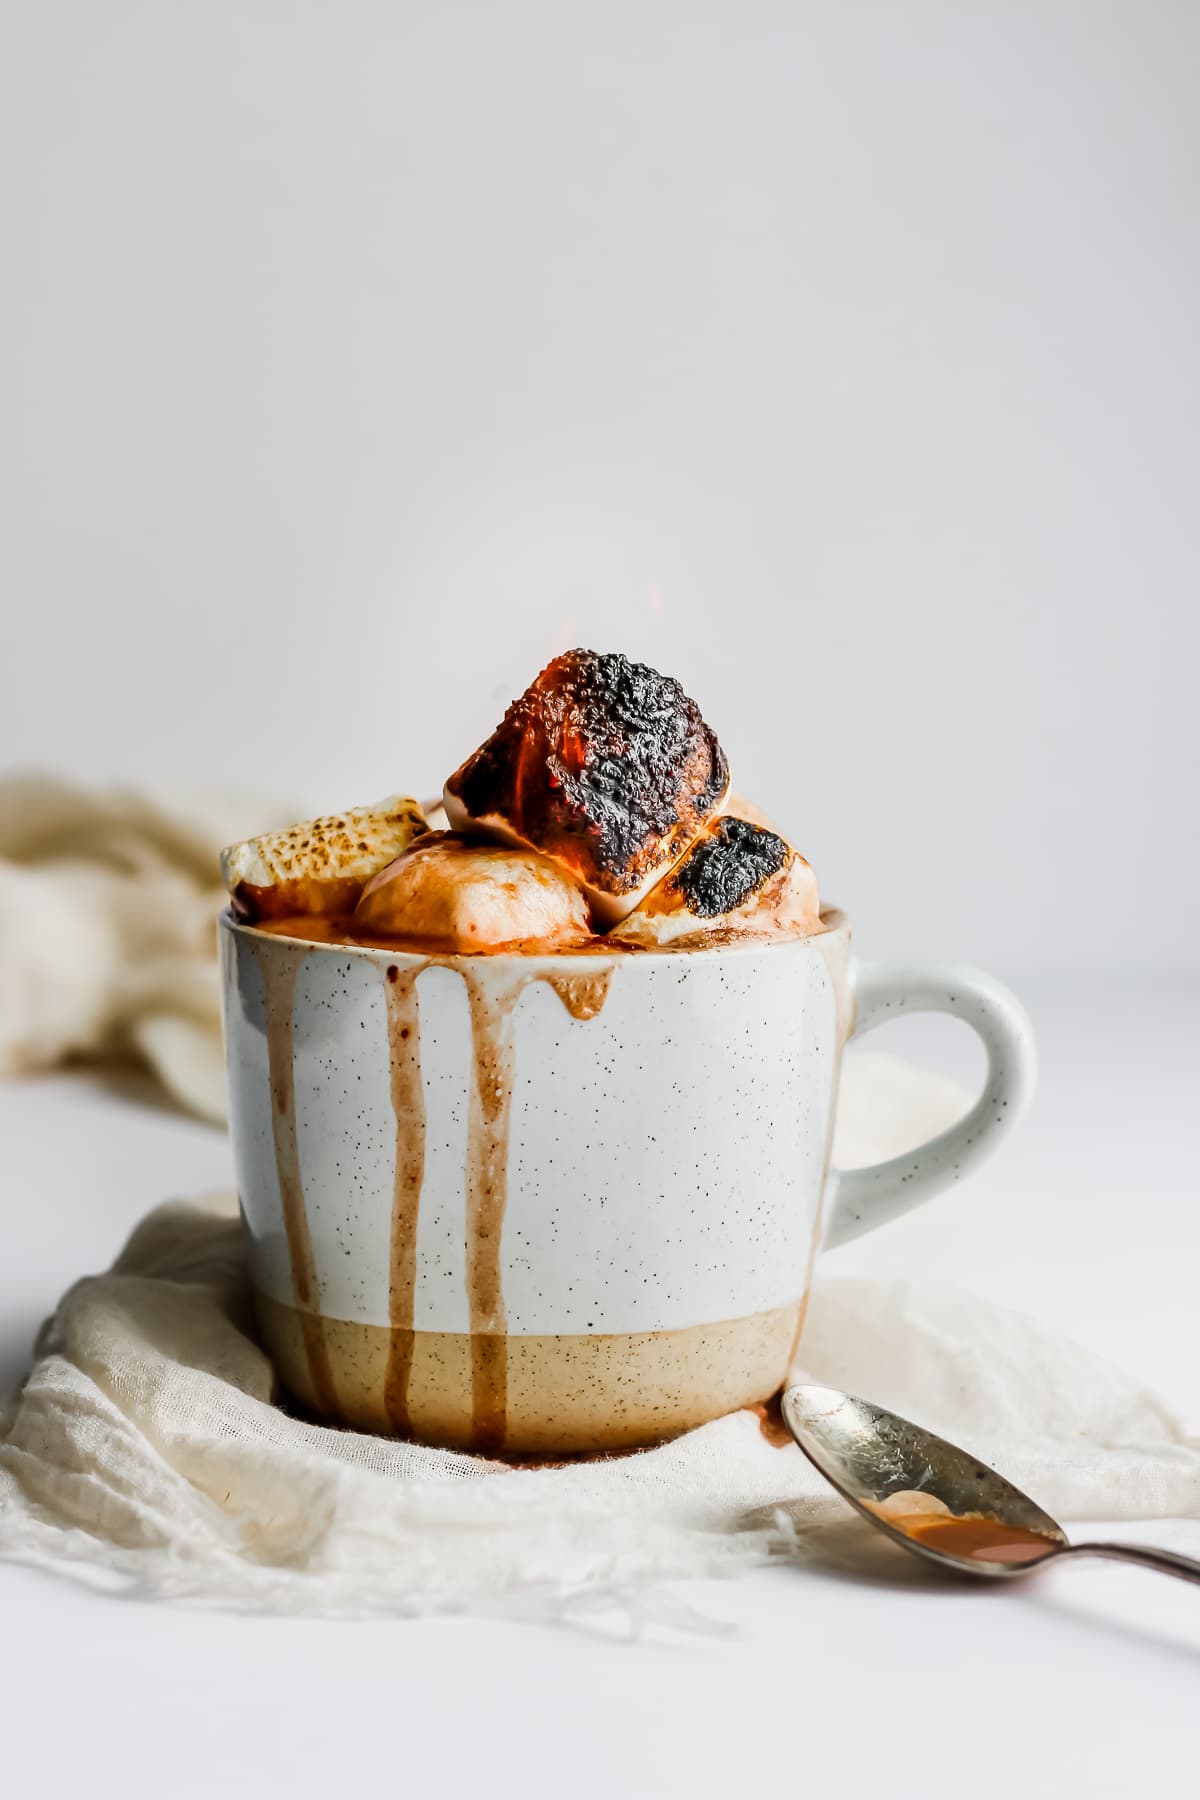 Mug of dairy-free hot chocolate with marshmallows on top.